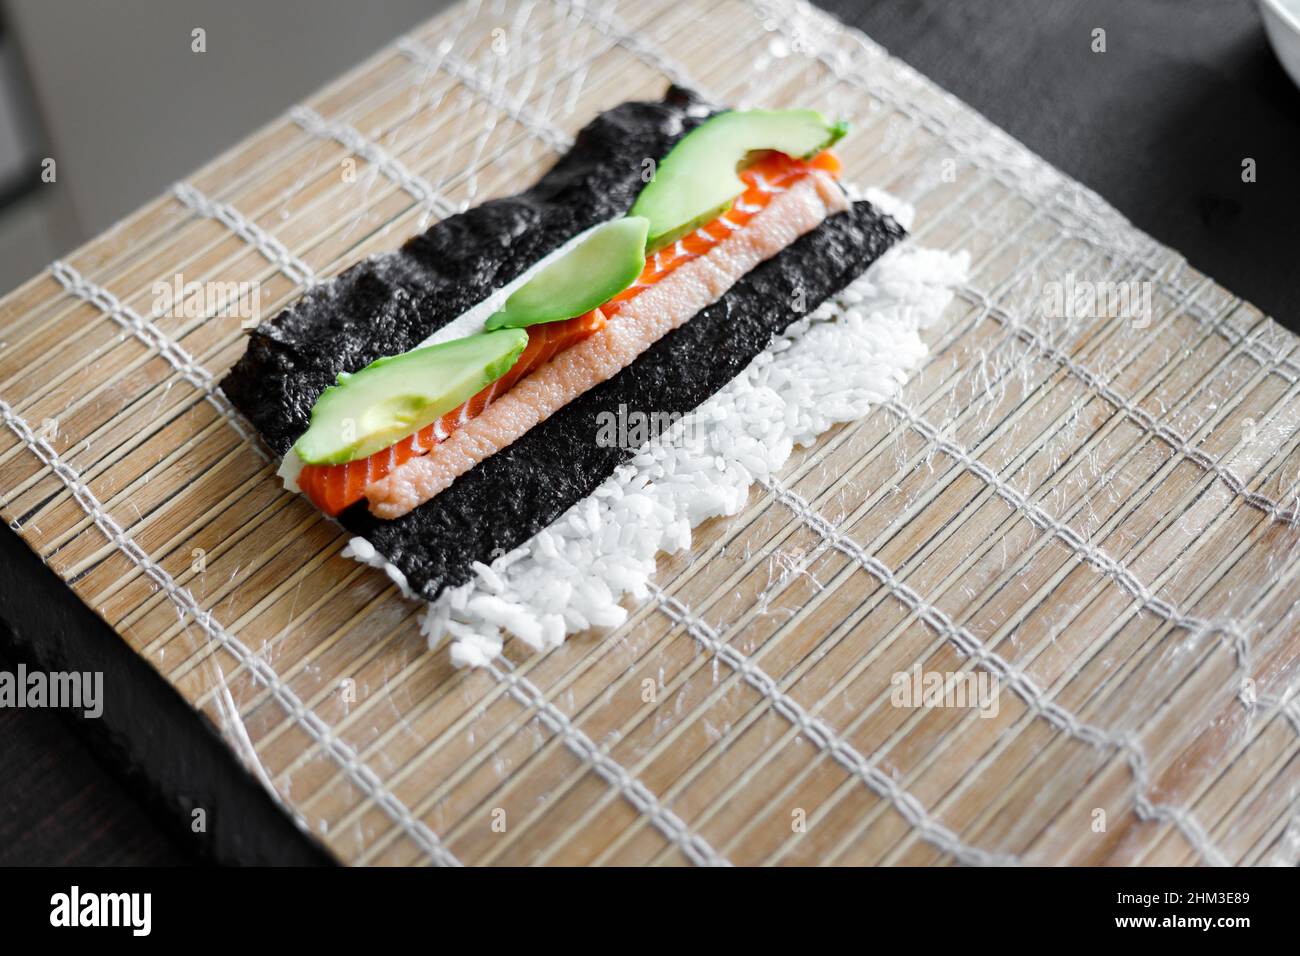 https://c8.alamy.com/comp/2HM3E89/ingredients-of-sushi-roll-ready-for-wrapping-on-the-bamboo-mat-2HM3E89.jpg